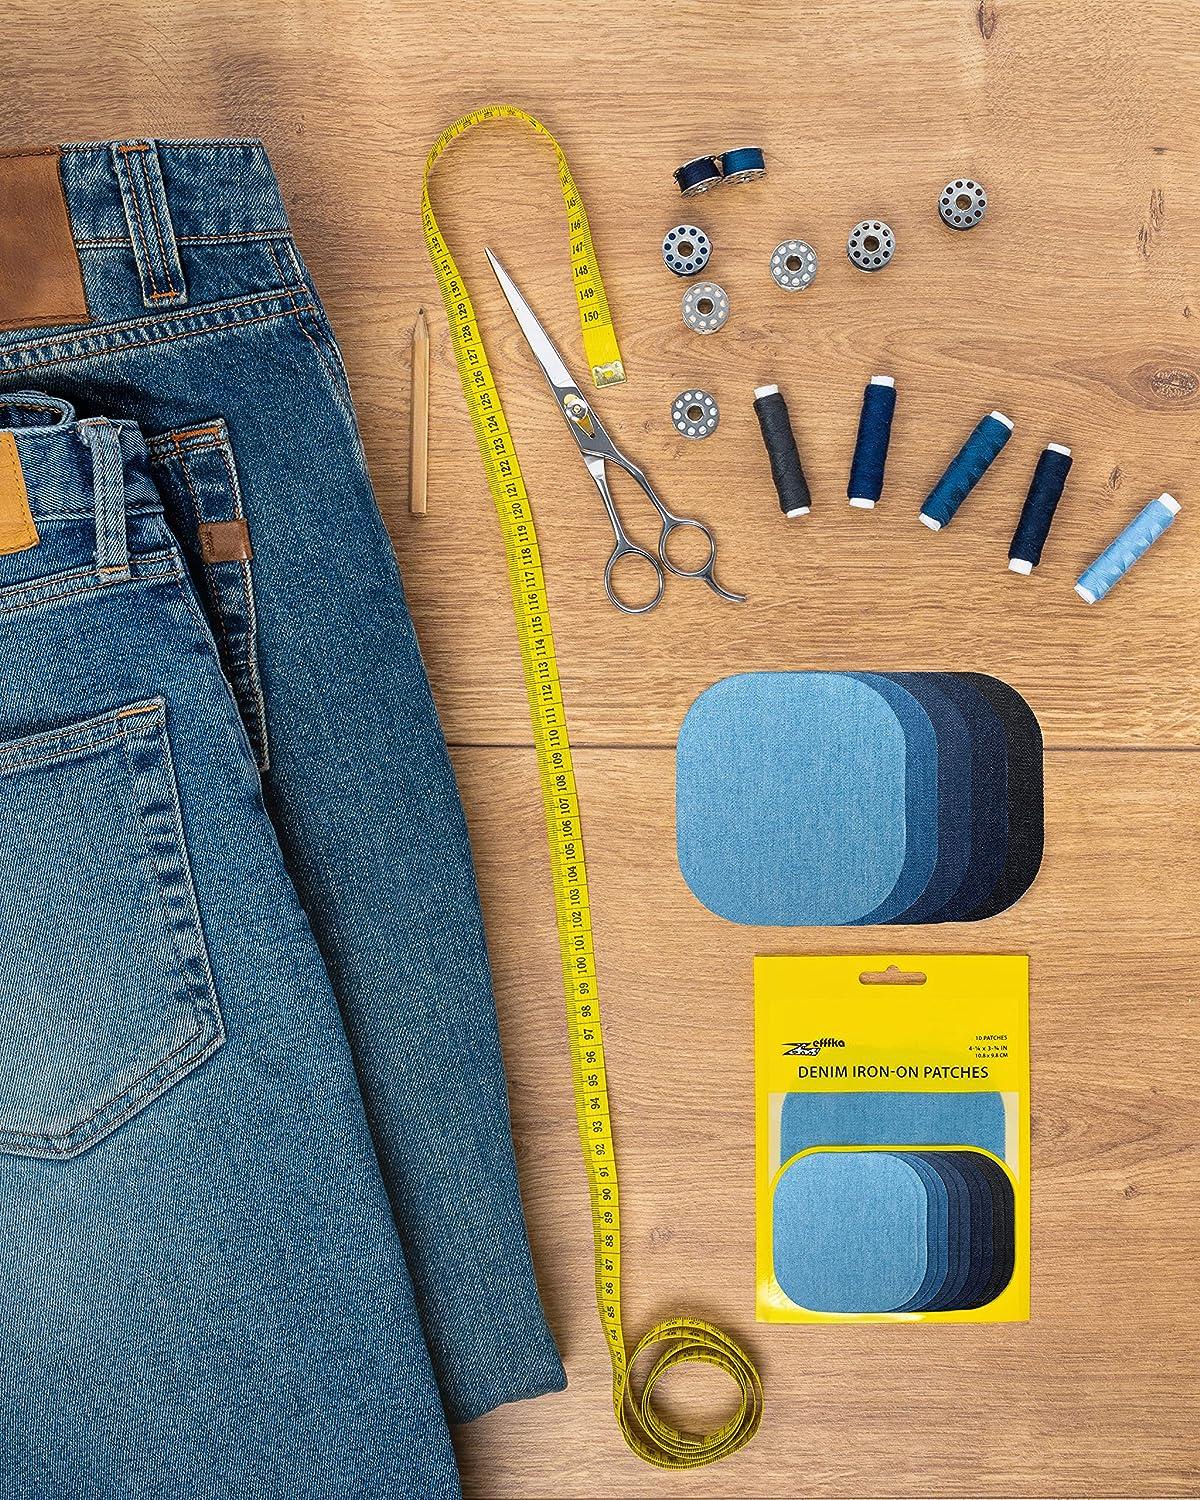 ZEFFFKA Premium Quality Denim Iron-on Jean Patches Inside & Outside  Strongest Glue 100% Cotton Assorted Shades of Blue Black Repair Decorating  Kit 10 Pieces Size 4-1/4 by 3-3/4 (9.8 cm x 10.8